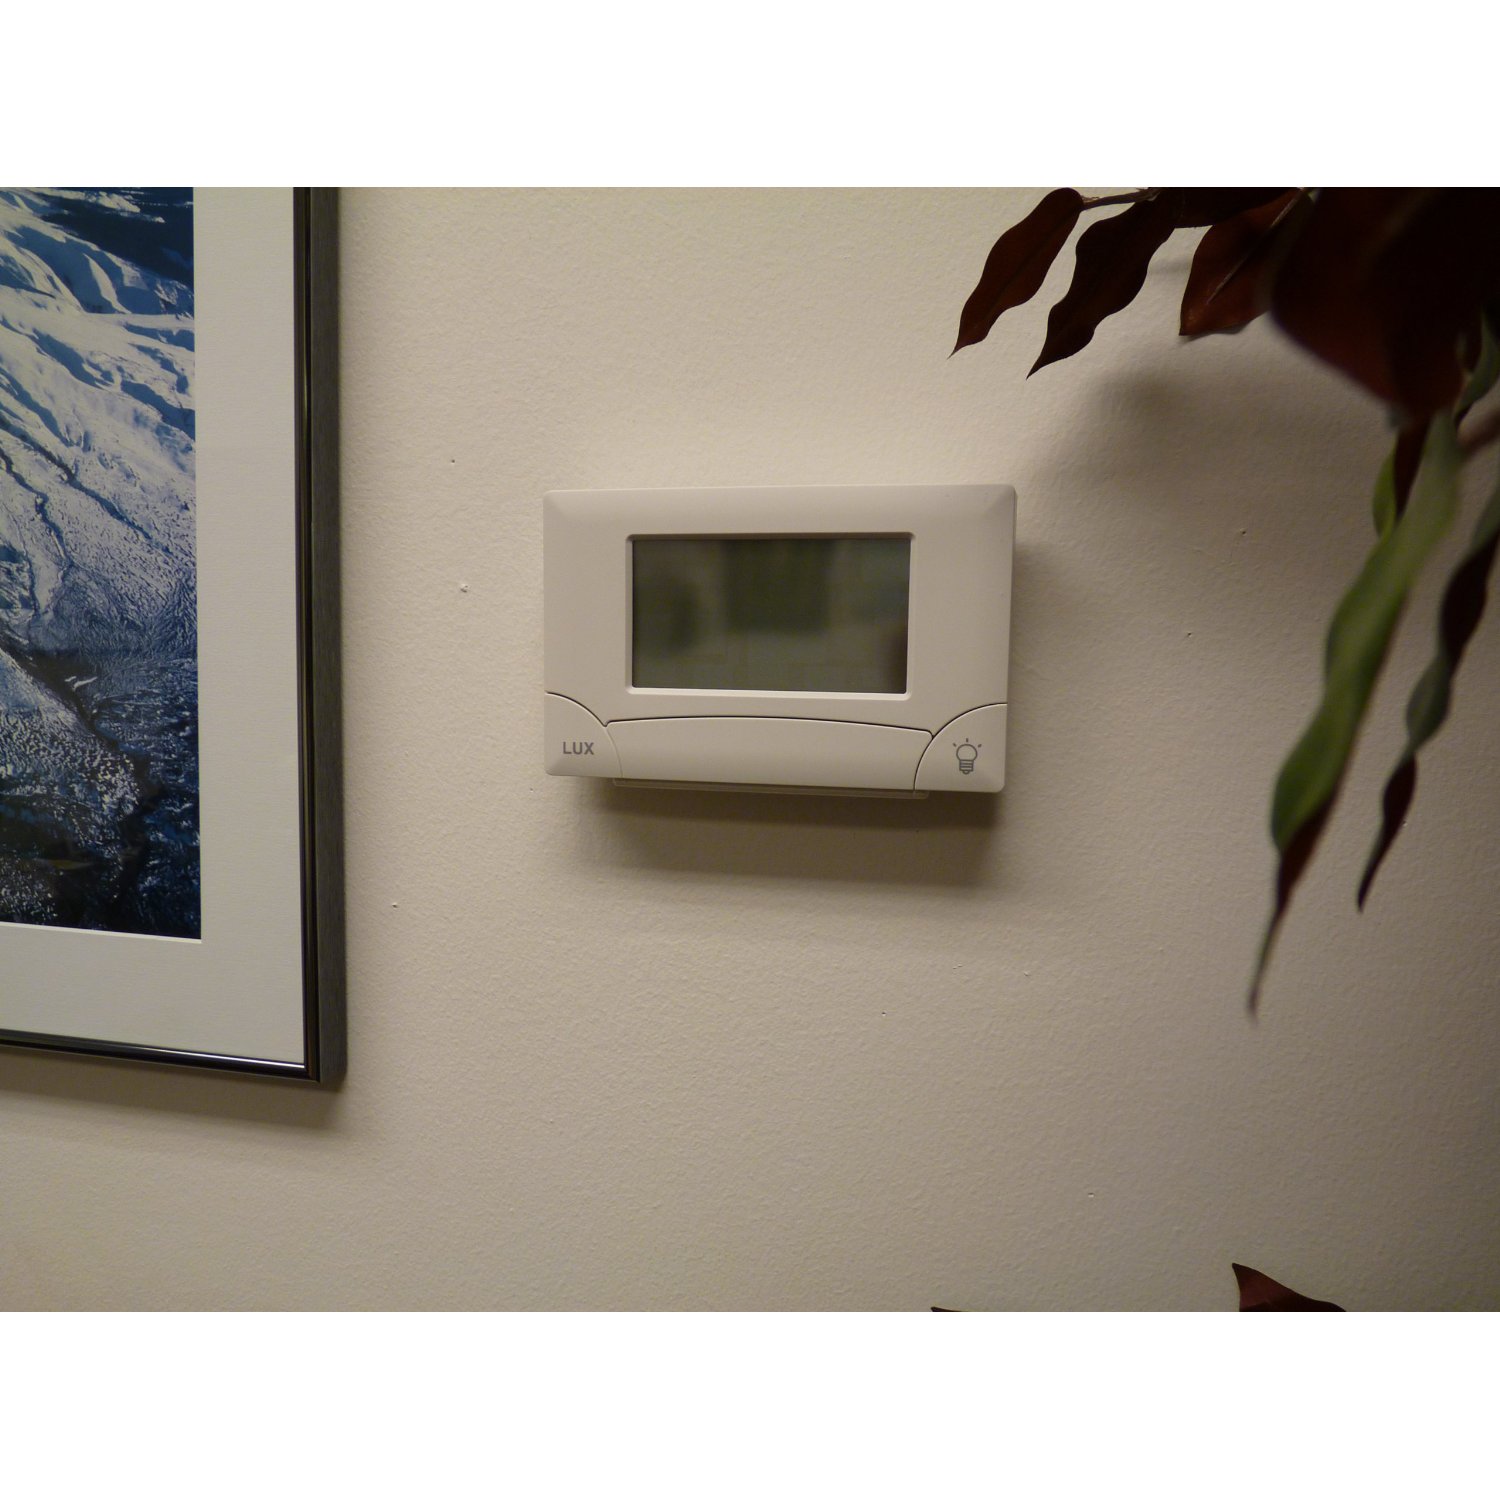 http://thetechjournal.com/wp-content/uploads/images/1202/1329391308-lux-tx9000ts-touch-screen-sevenday-programmable-thermostat-3.jpg